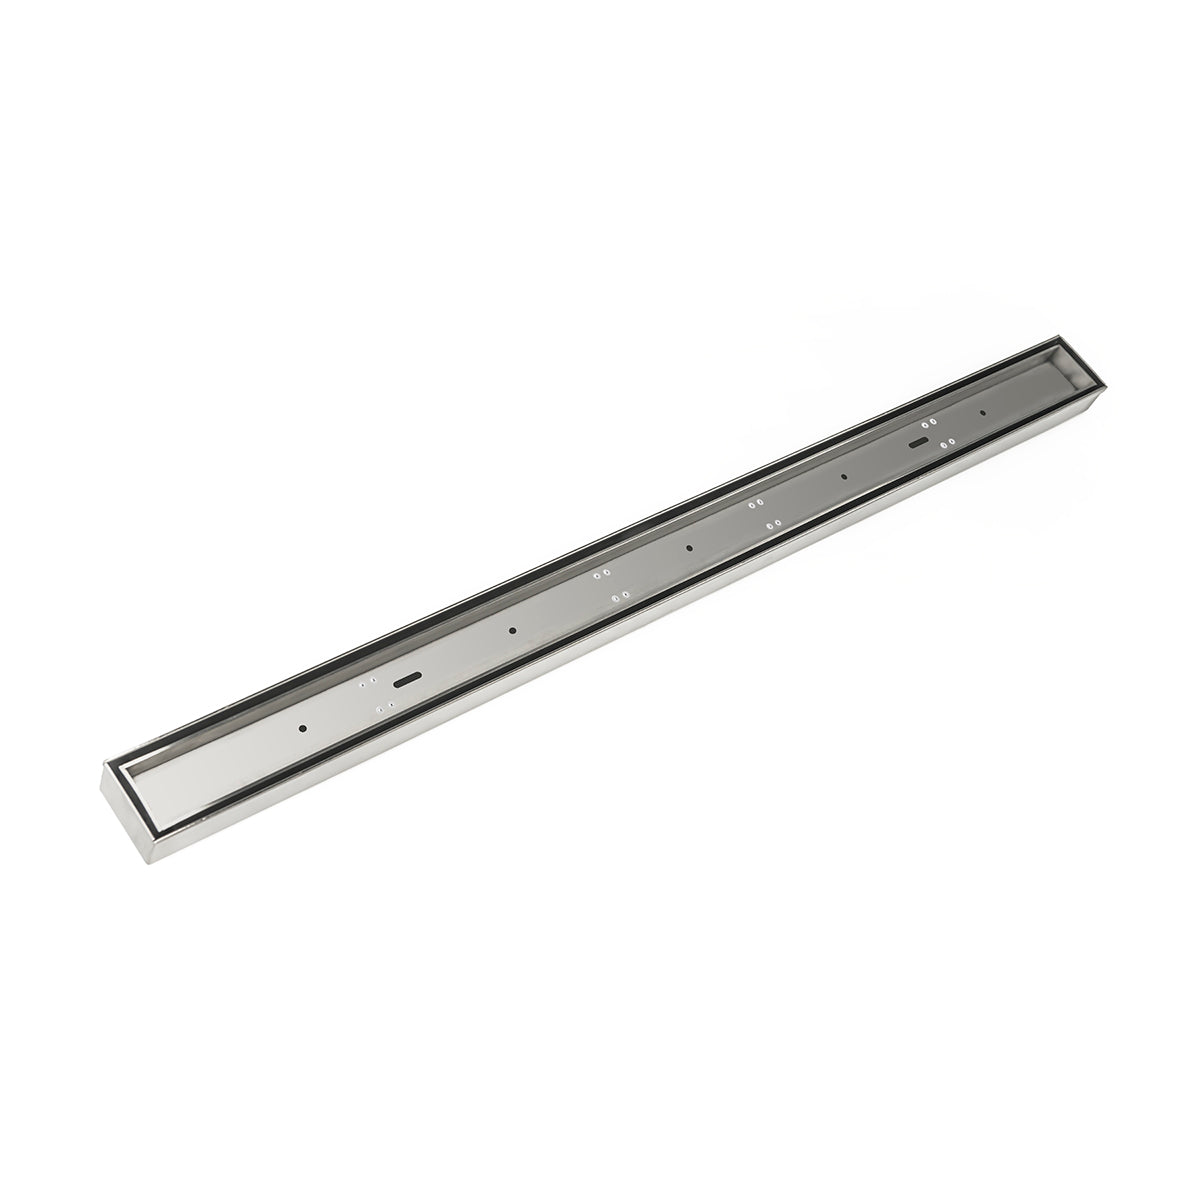 Infinity Drain 48" FX Low Profile Series Fixed Length Linear Drain Kit with Tile Insert Frame